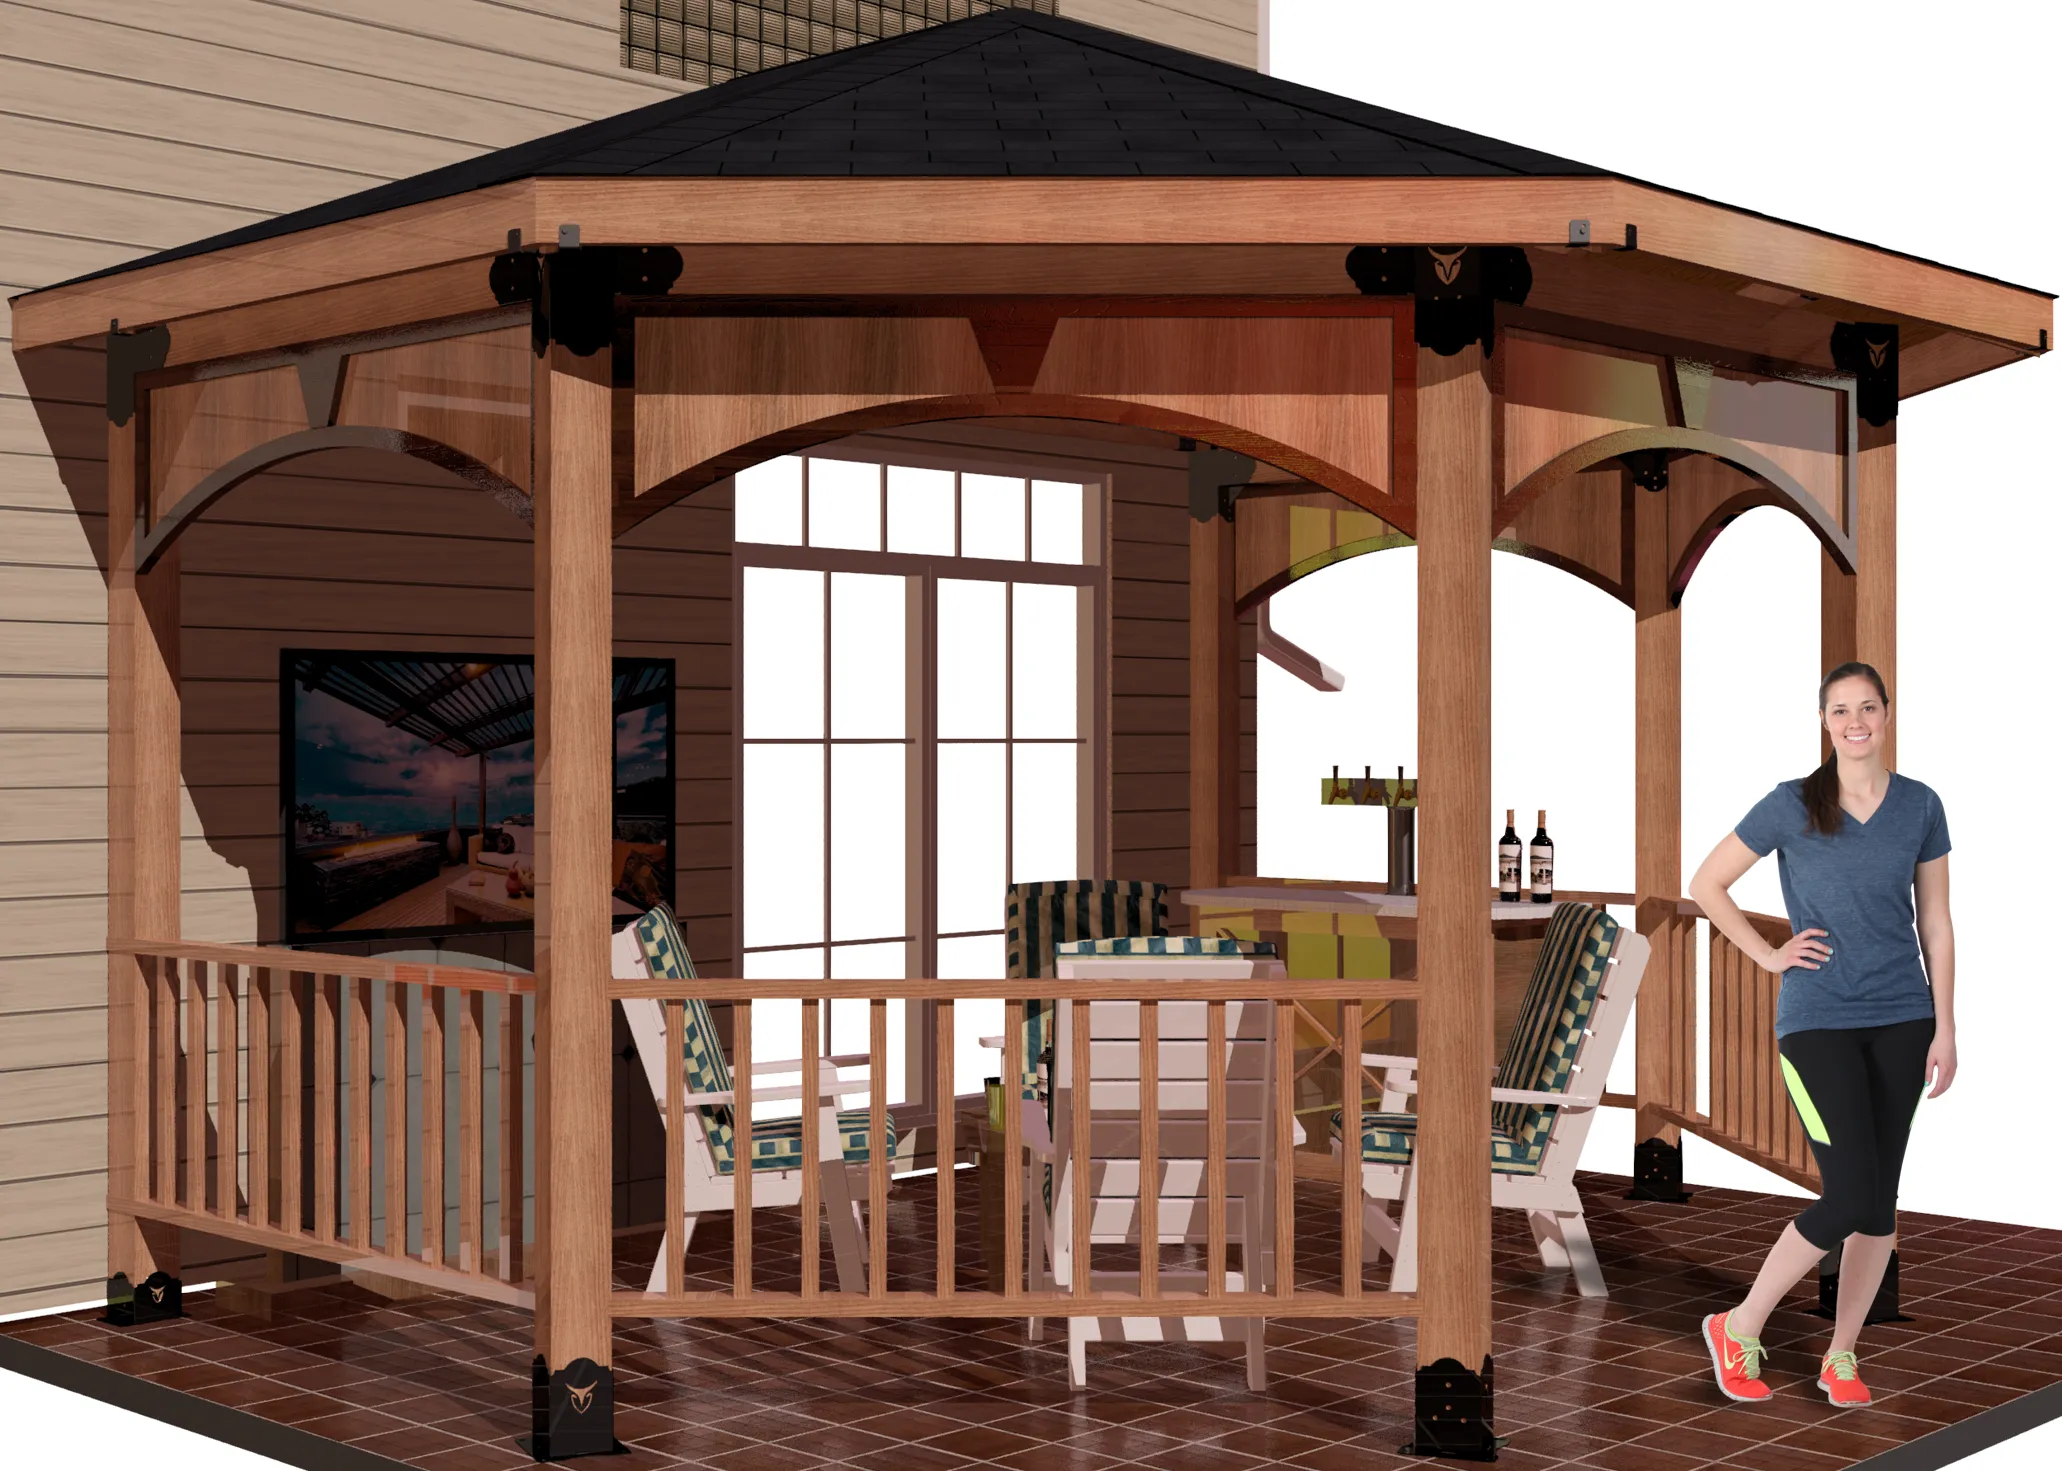 diy, 6x6, wall attached, surface mounted, solid roofed patio cover with bar, barbecuer, tv, and casual seating